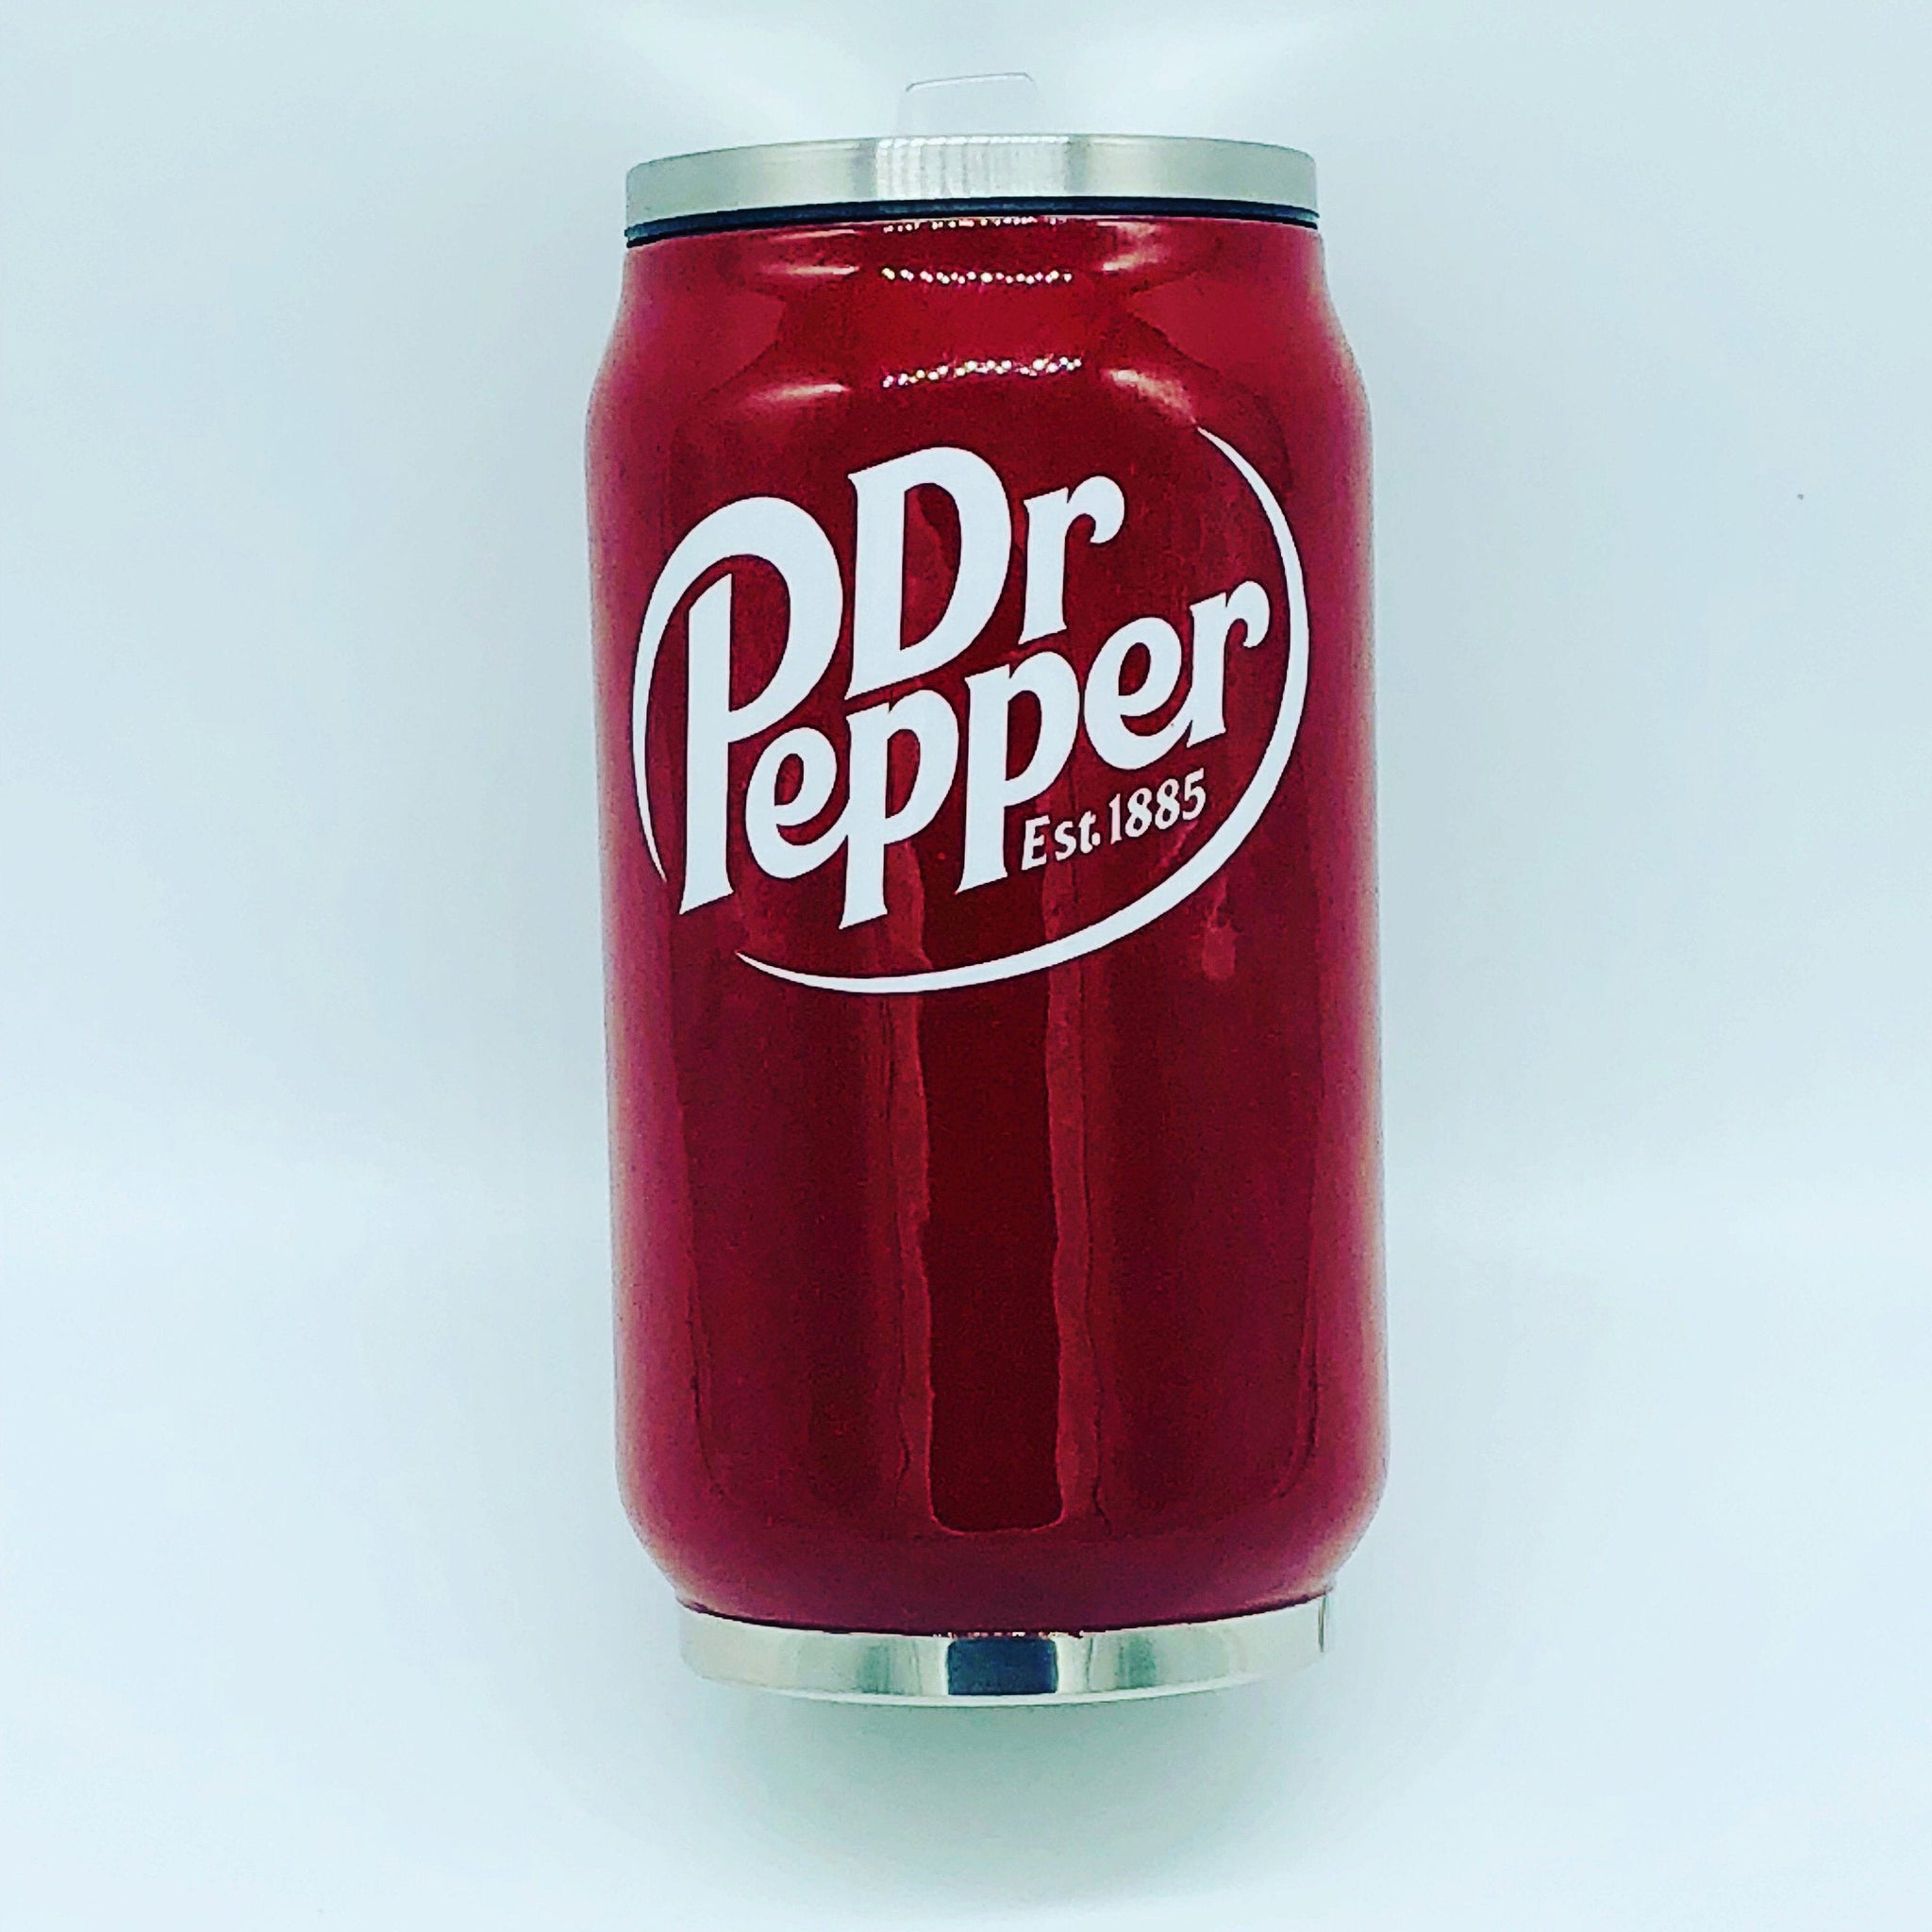 Bring Me a Dr. Pepper and Tell Me I'm Beautiful Tumbler **FREE